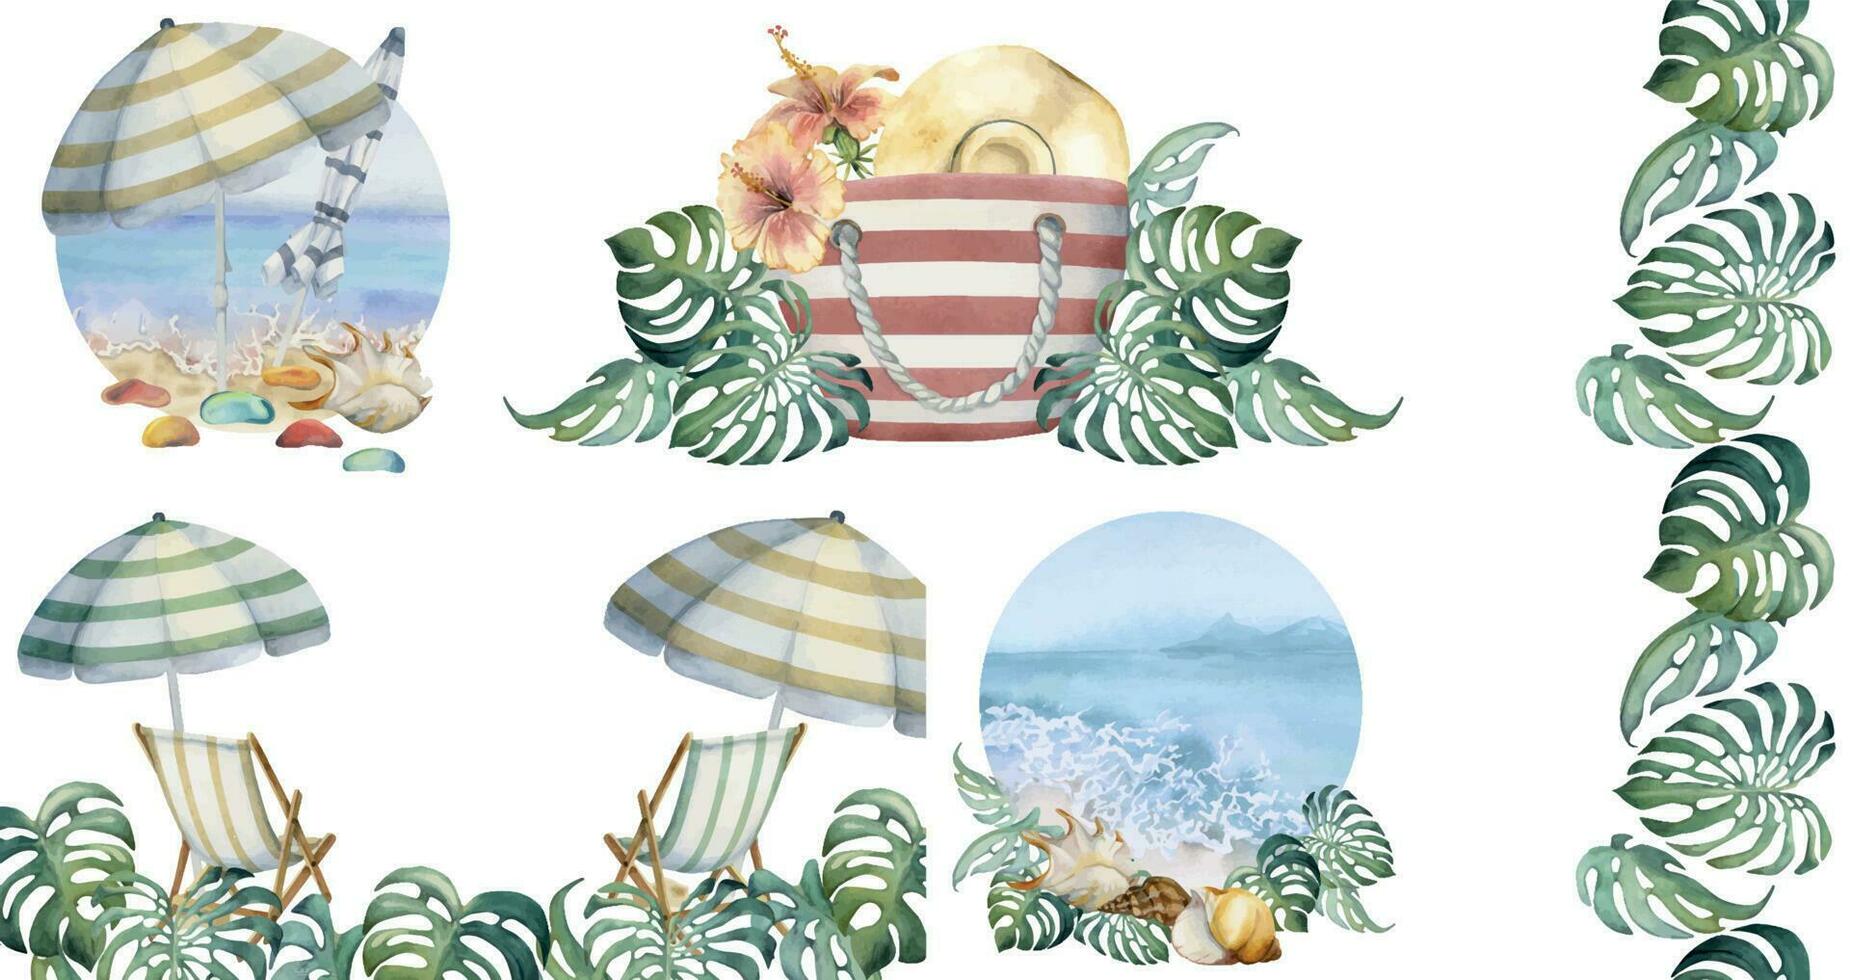 Hand drawn watercolor set of compositions. Beach accessories, sea sand umbrella shells. Isolated on white background. Design for wall art, wedding, print, fabric, cover, card, tourism, travel booklet. vector